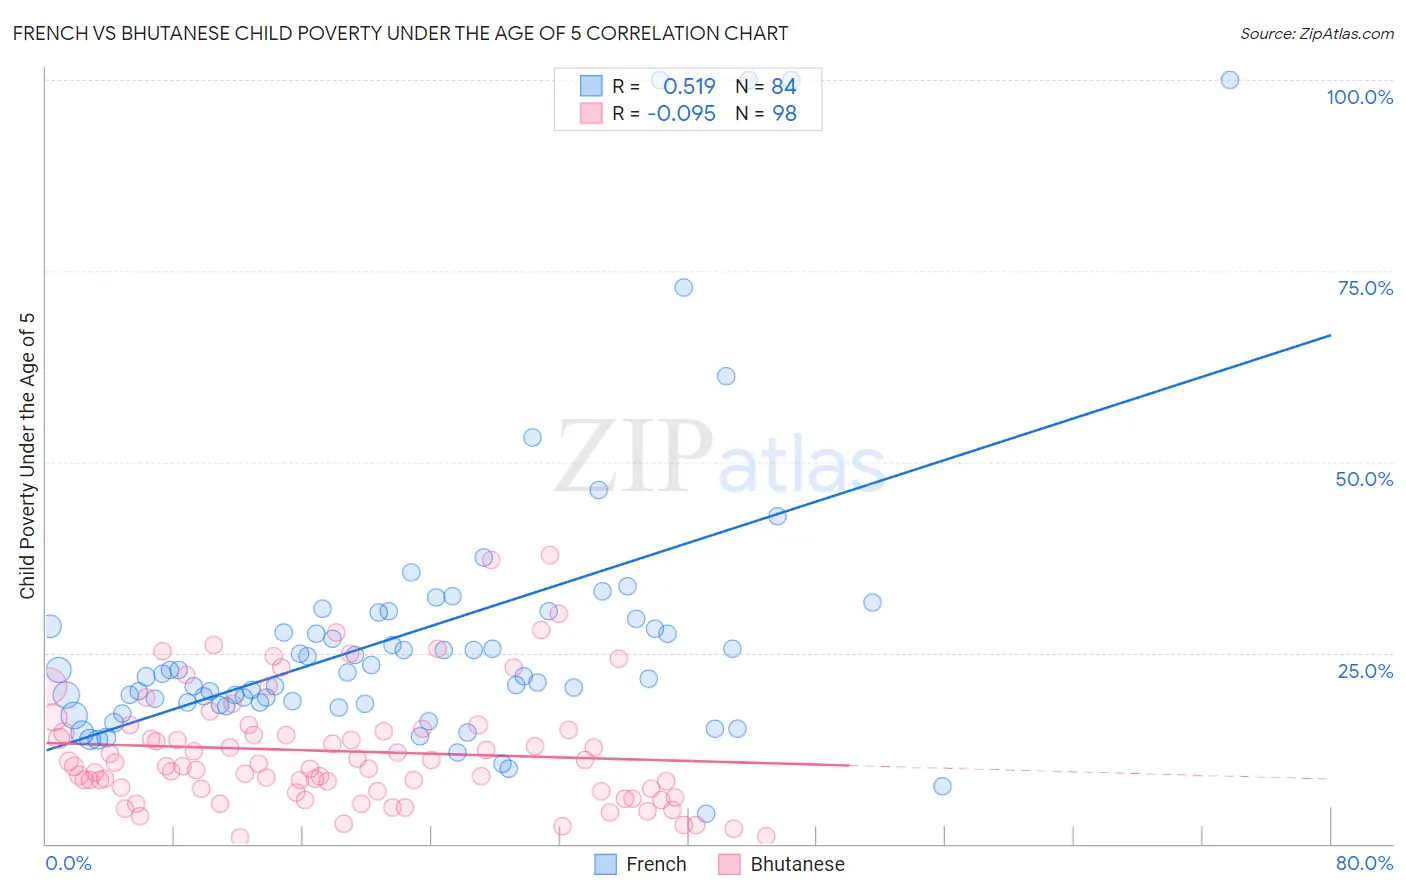 French vs Bhutanese Child Poverty Under the Age of 5